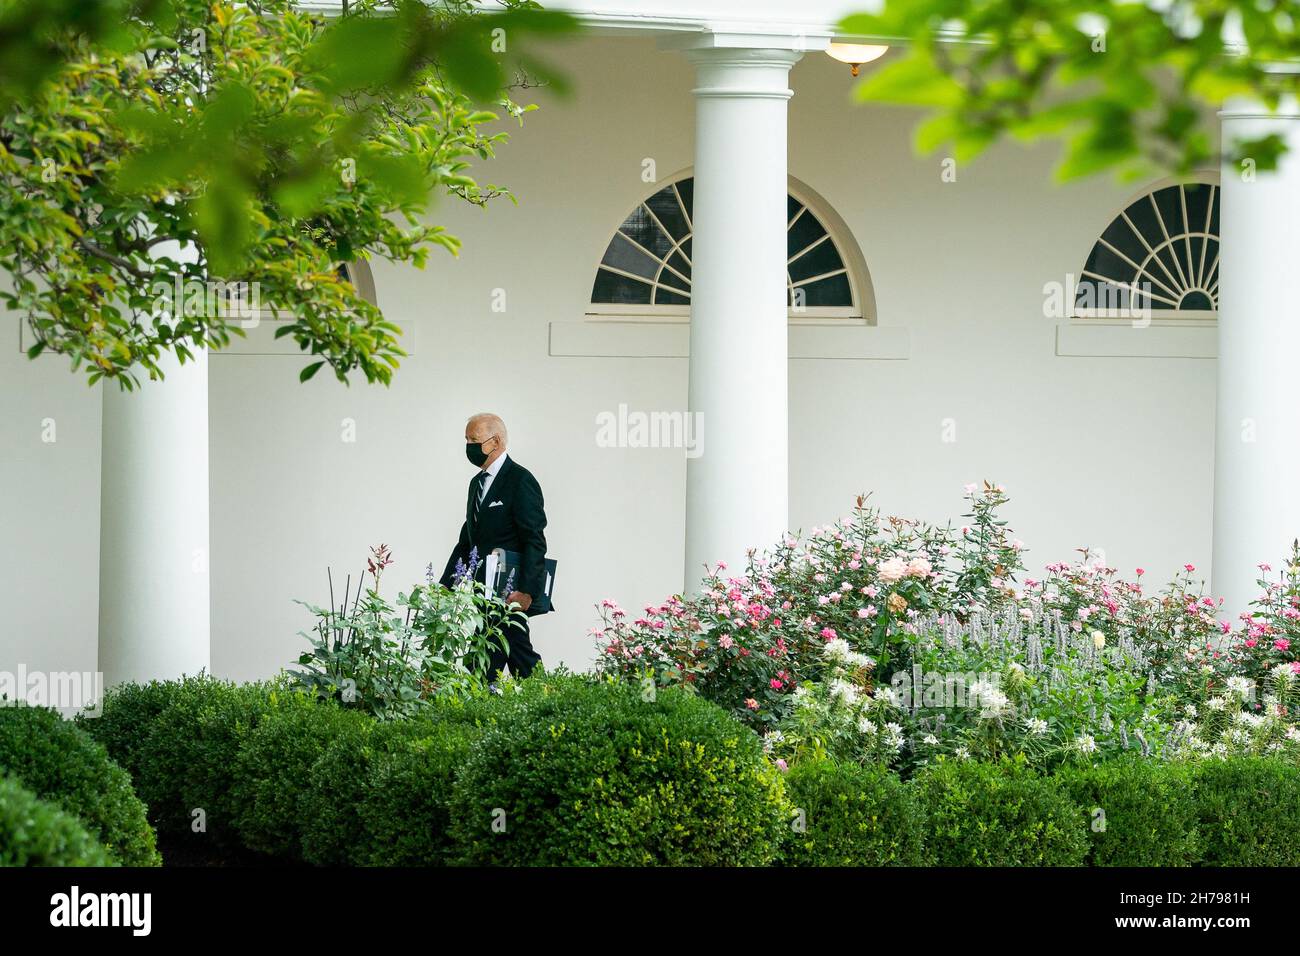 WASHINGTON DC, USA - 18 August 2021 - US President Joe Biden walks along the Colonnade, Wednesday, August 18, 2021, on his way to the Oval Office of t Stock Photo